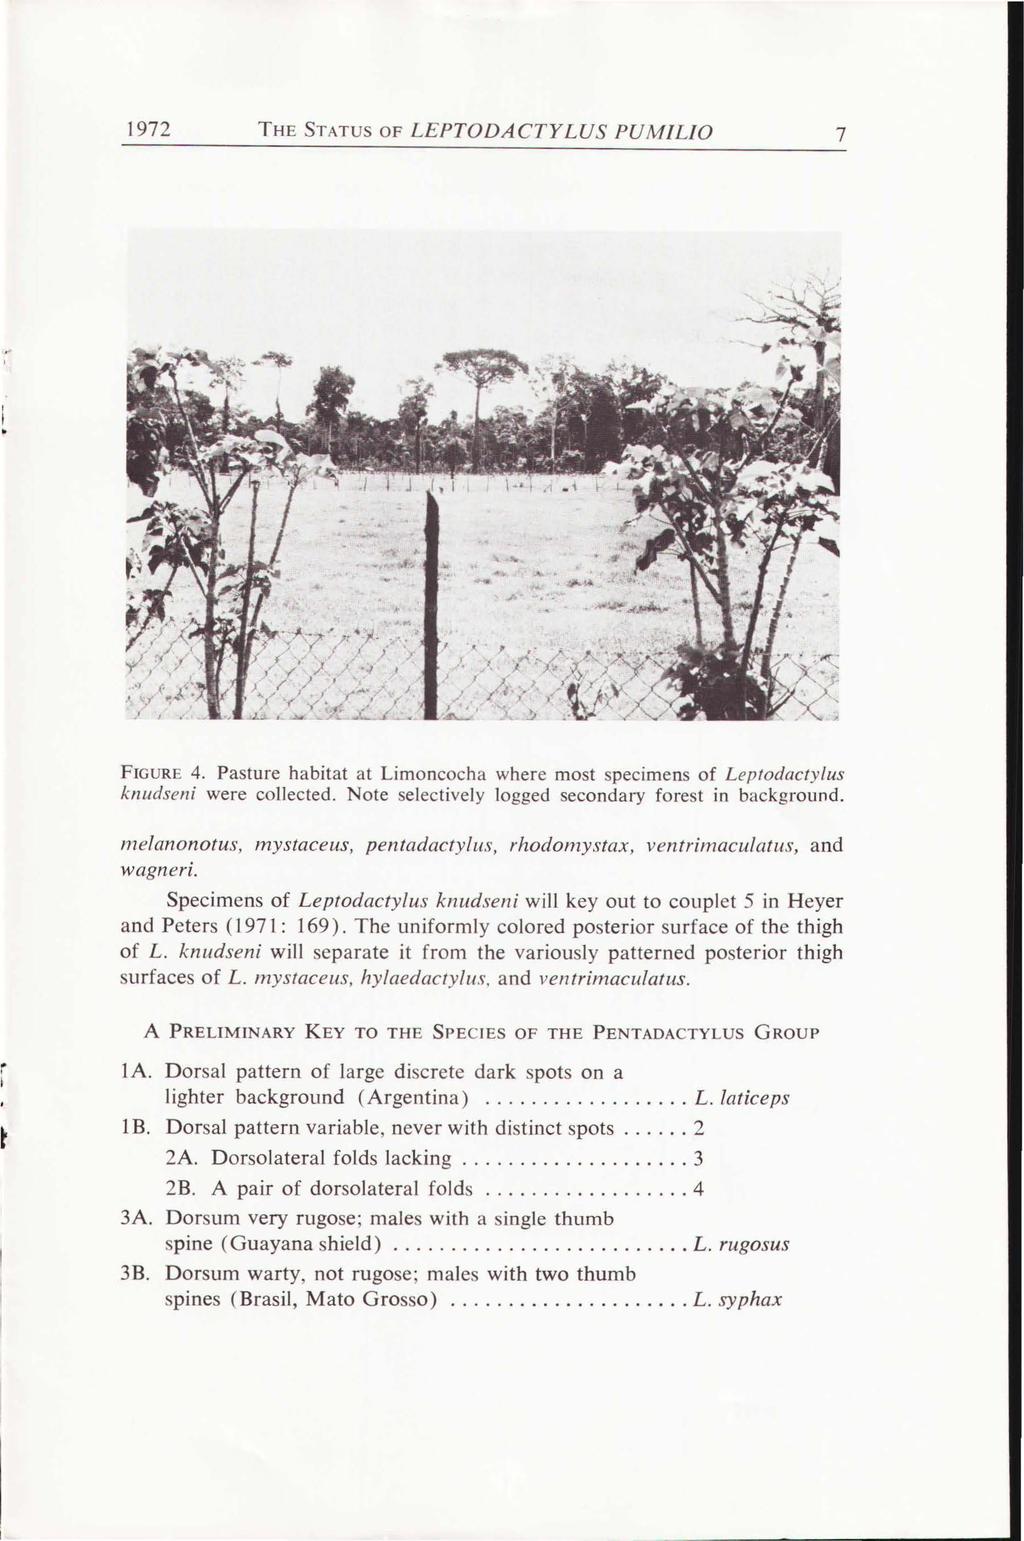 1972 THE STATUS OF LEPTODACTYLUS PUM/L/0 7 FIGURE 4. Pasture habitat at Limoncocha where most specimens of Leptodacty/us knudseni were collected.